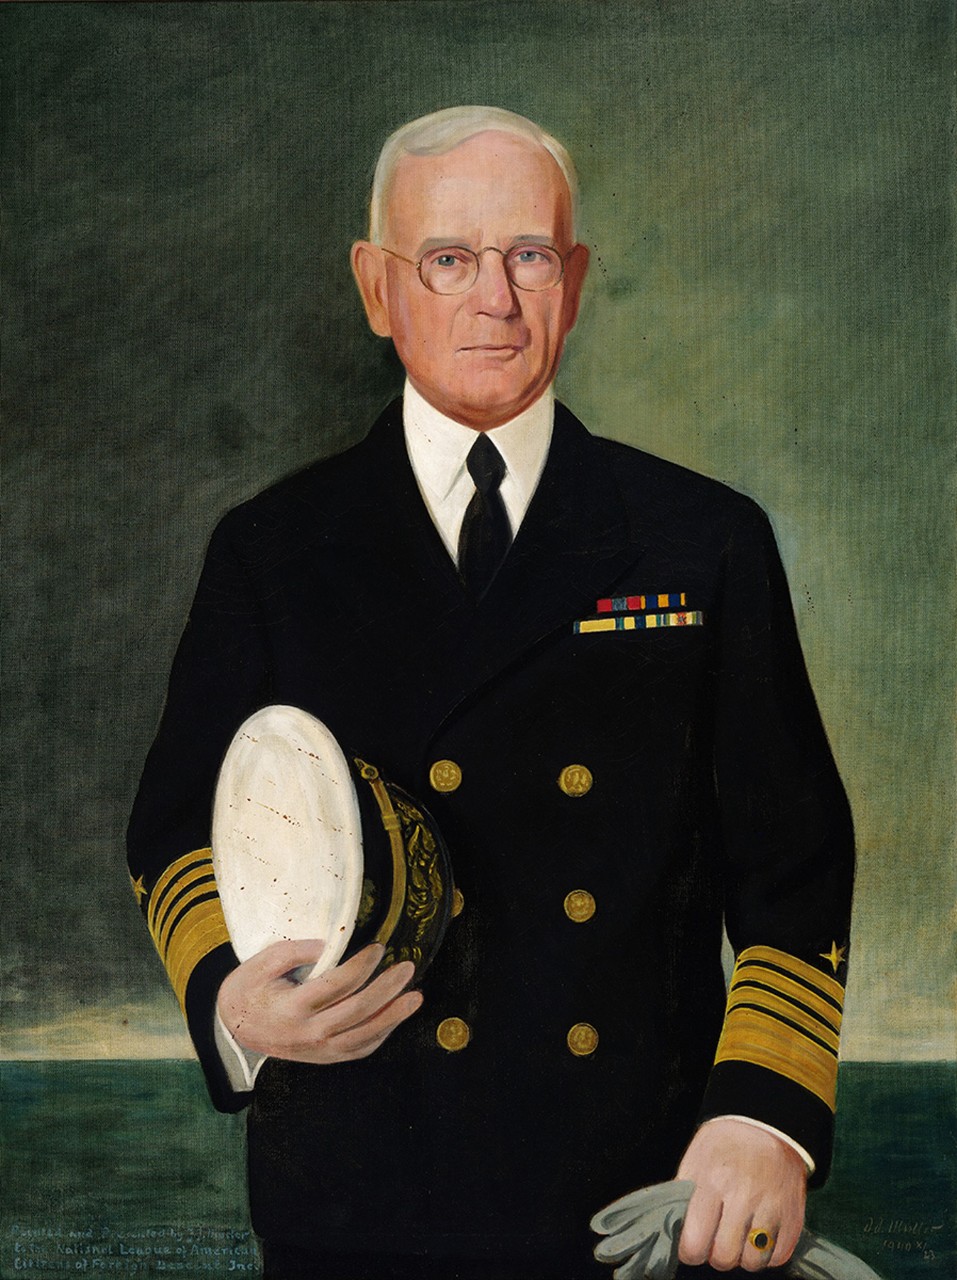 Admiral William H. Standley in dress blues holding his hat in one hand and gloves in the other